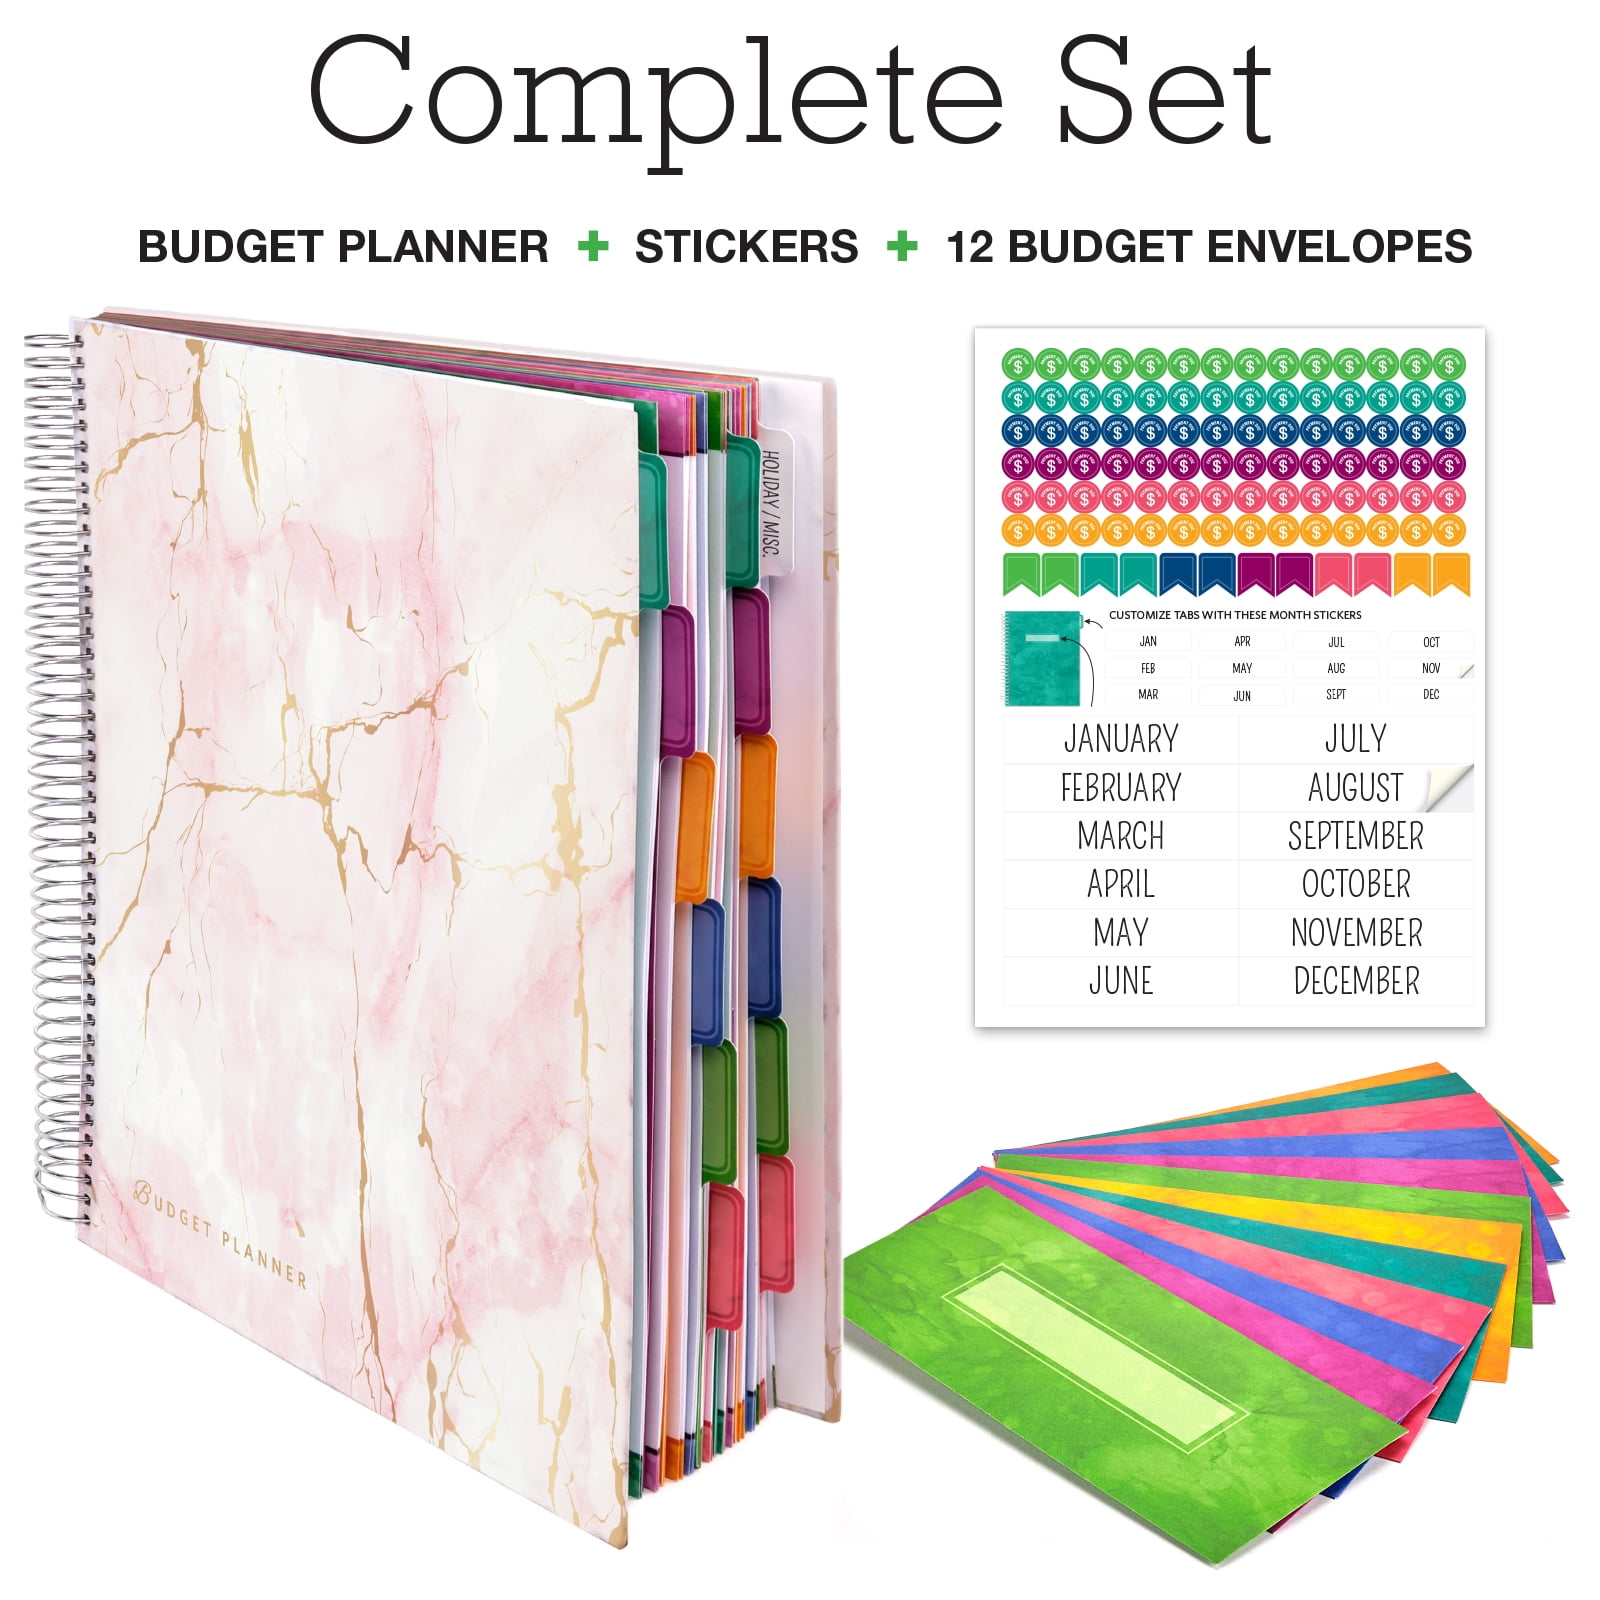 Monthly Budget Planner and Bill Organizer Book - MG Publish